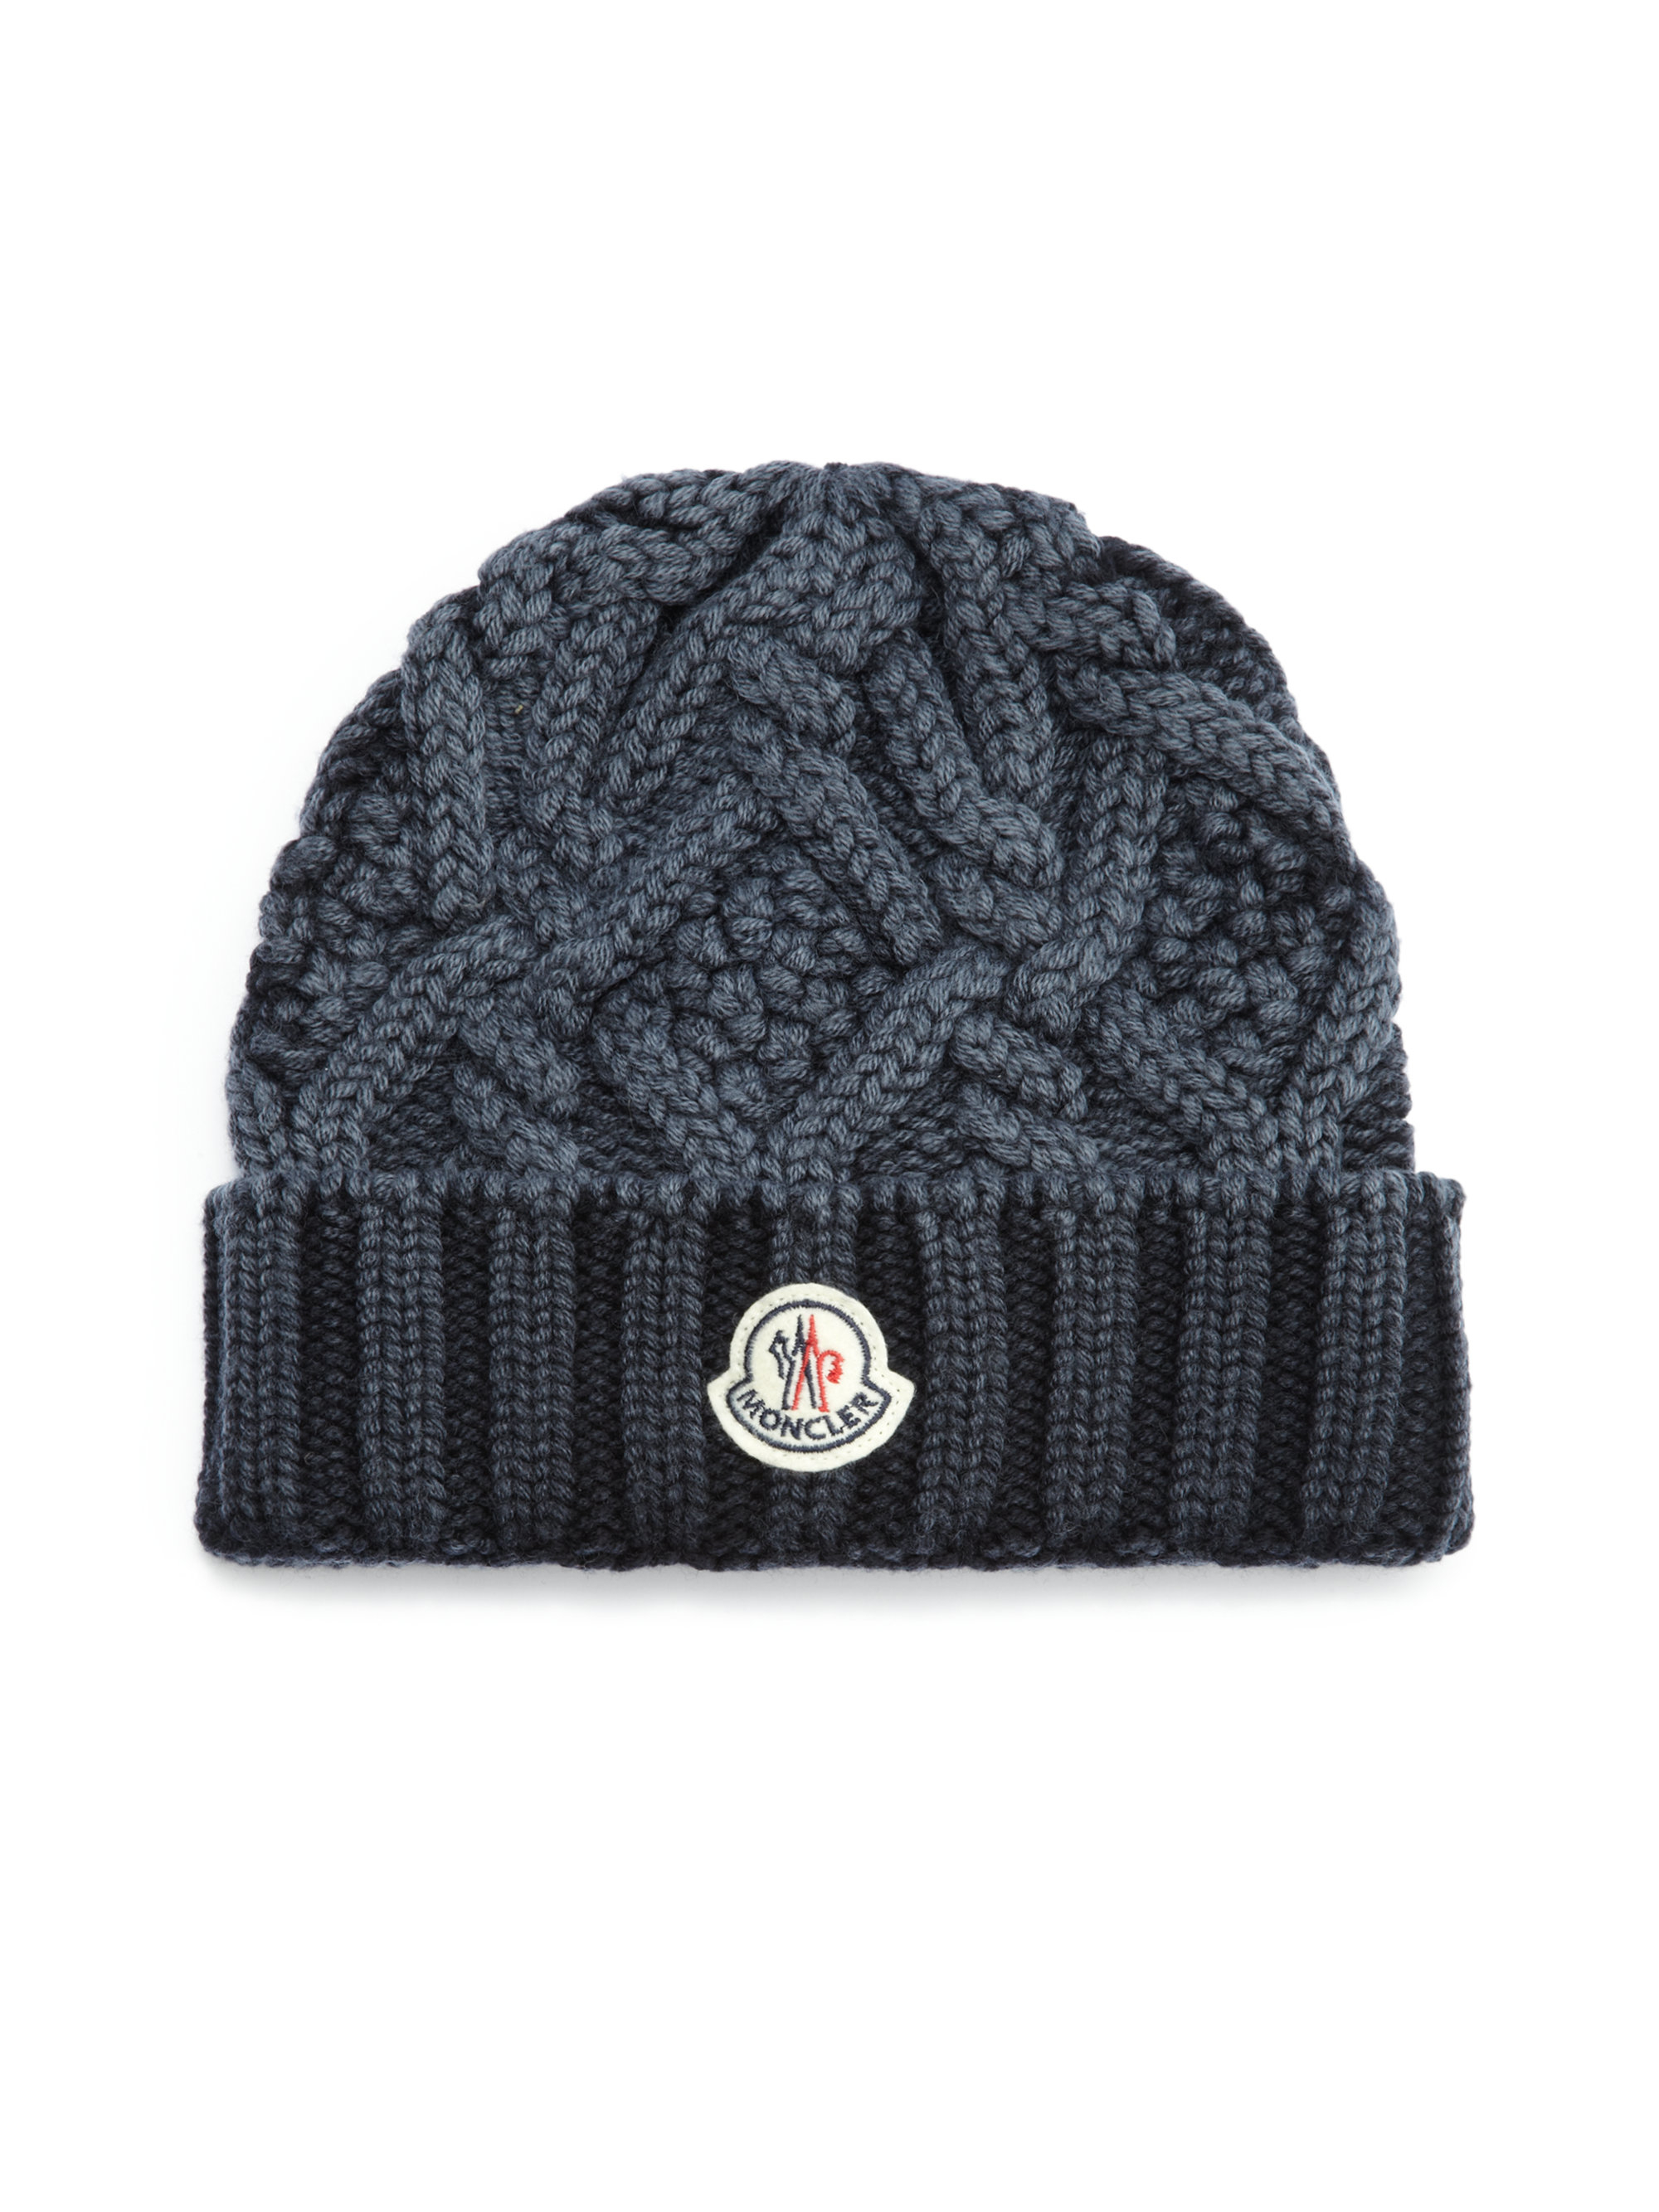 Moncler Cable-Knit Wool Hat in Blue for Men - Lyst